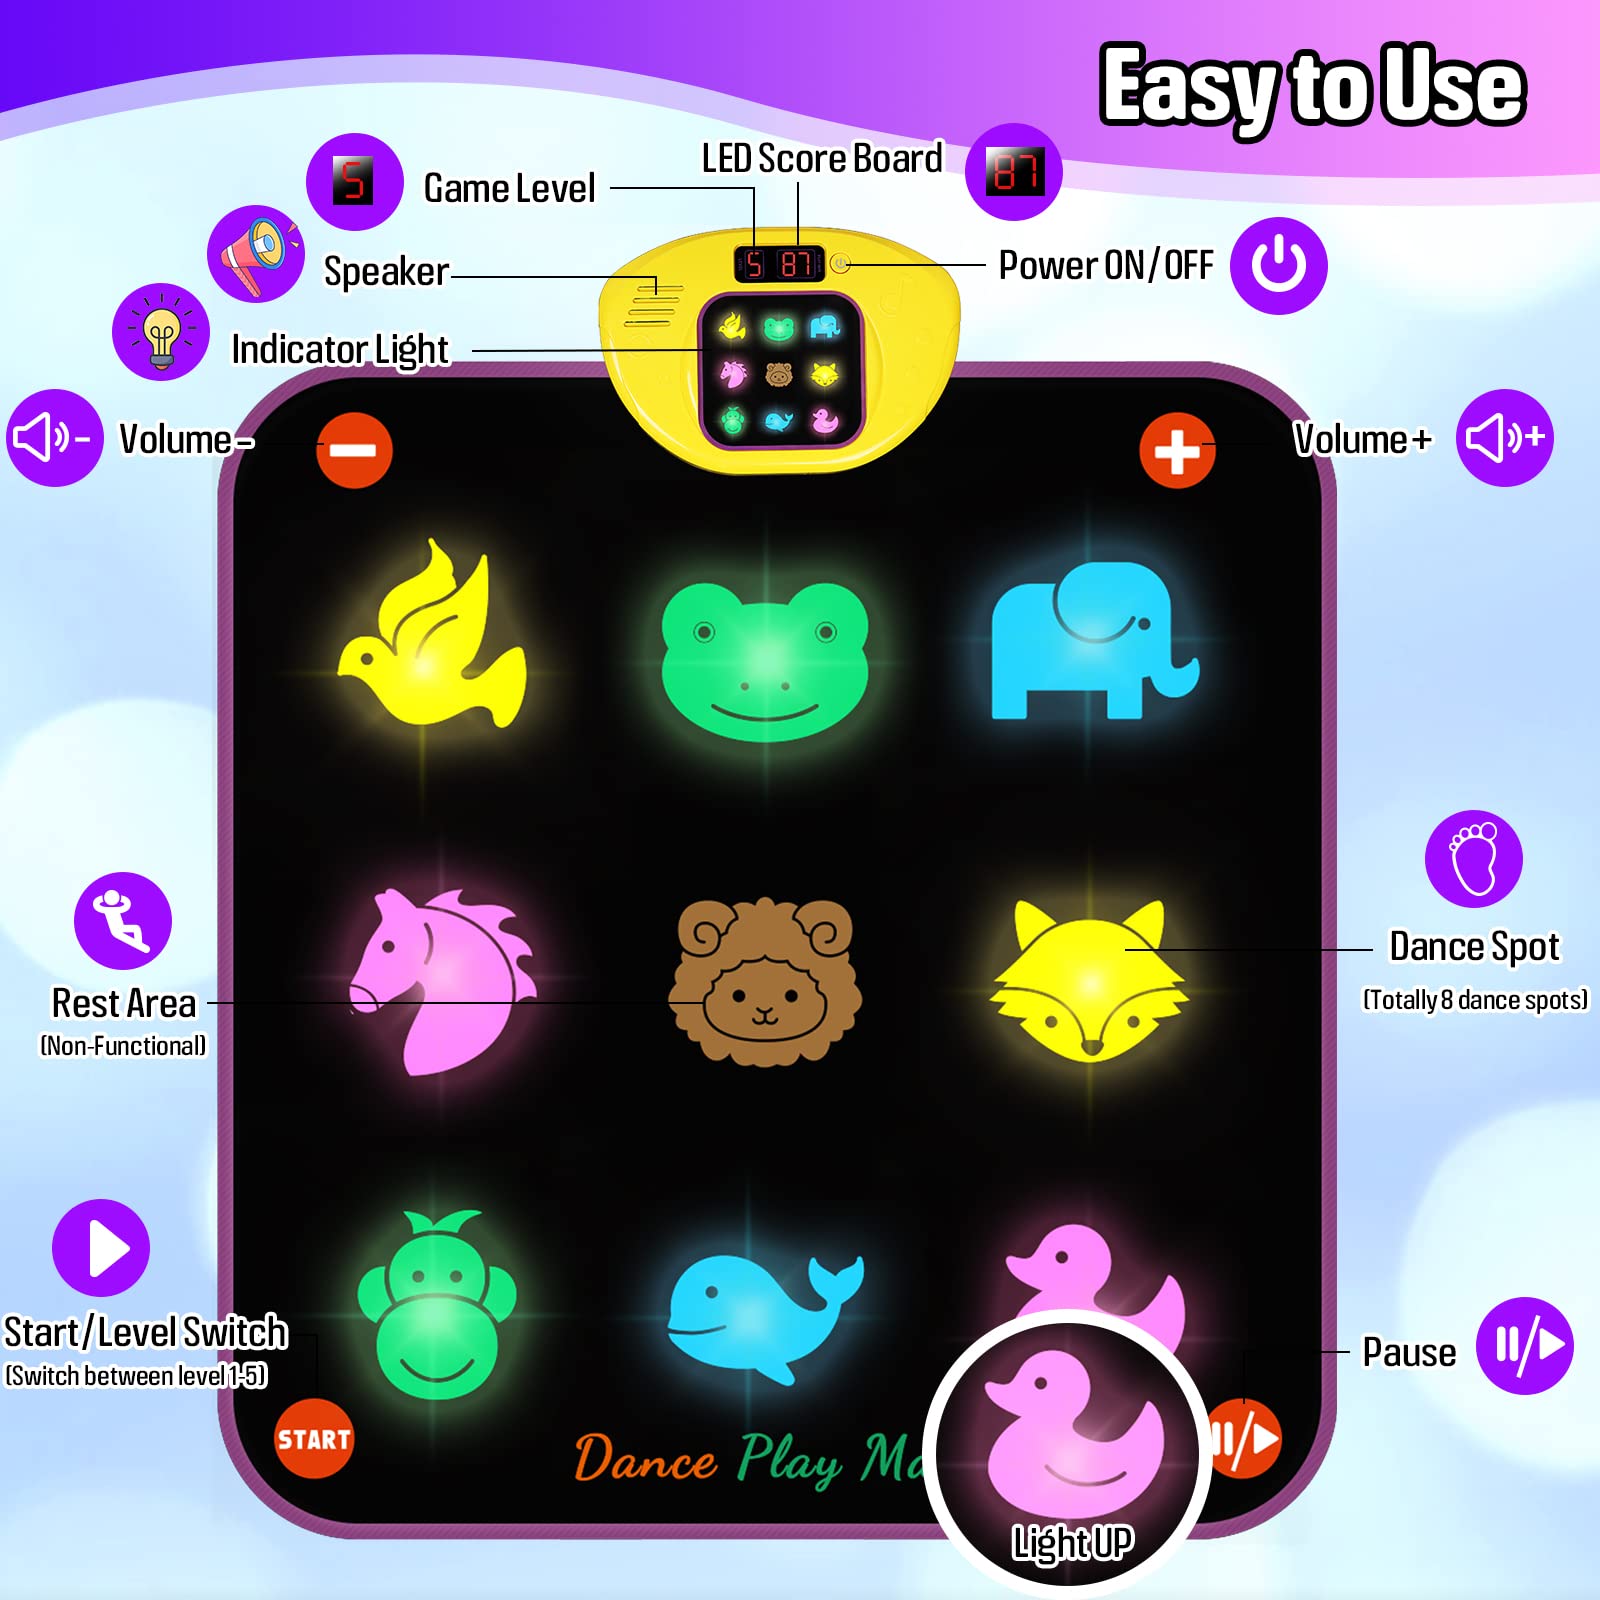 Dance Mat Toys for 3-8 Year Old for Kids, Upgraded Electronic Dance Pad with Light Up,Music Dance Game Mat with 5 Game Modes, 3 Challenge Levels,Birthday Xmas Gifts for 3 4 5 6 7 8+ Year Old Girls